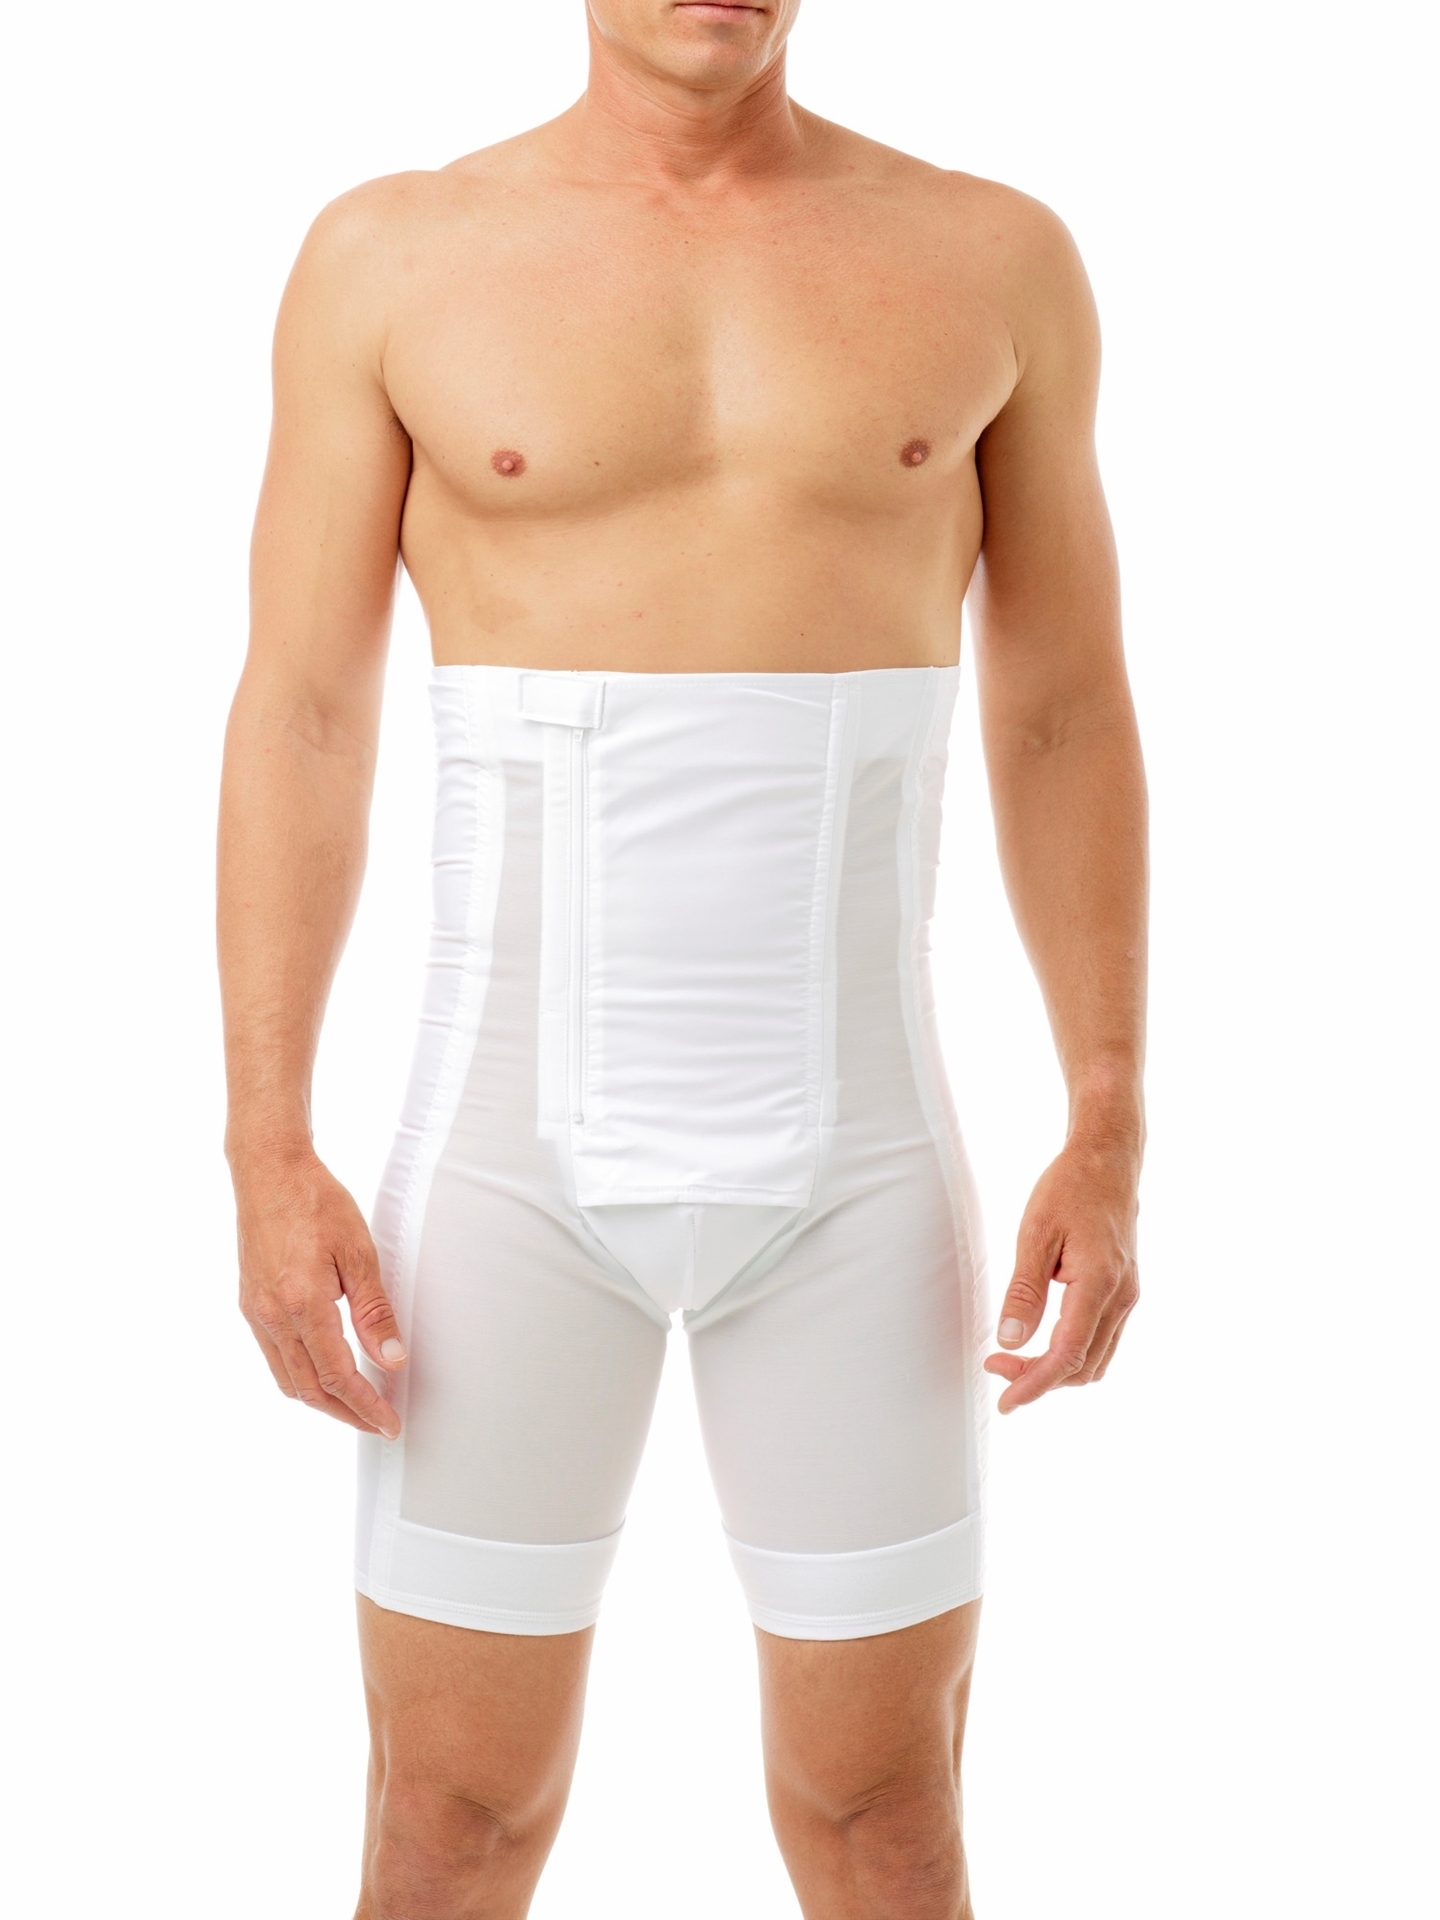 Shapewear for Mens Flattens The Chest and Torso Comfortable